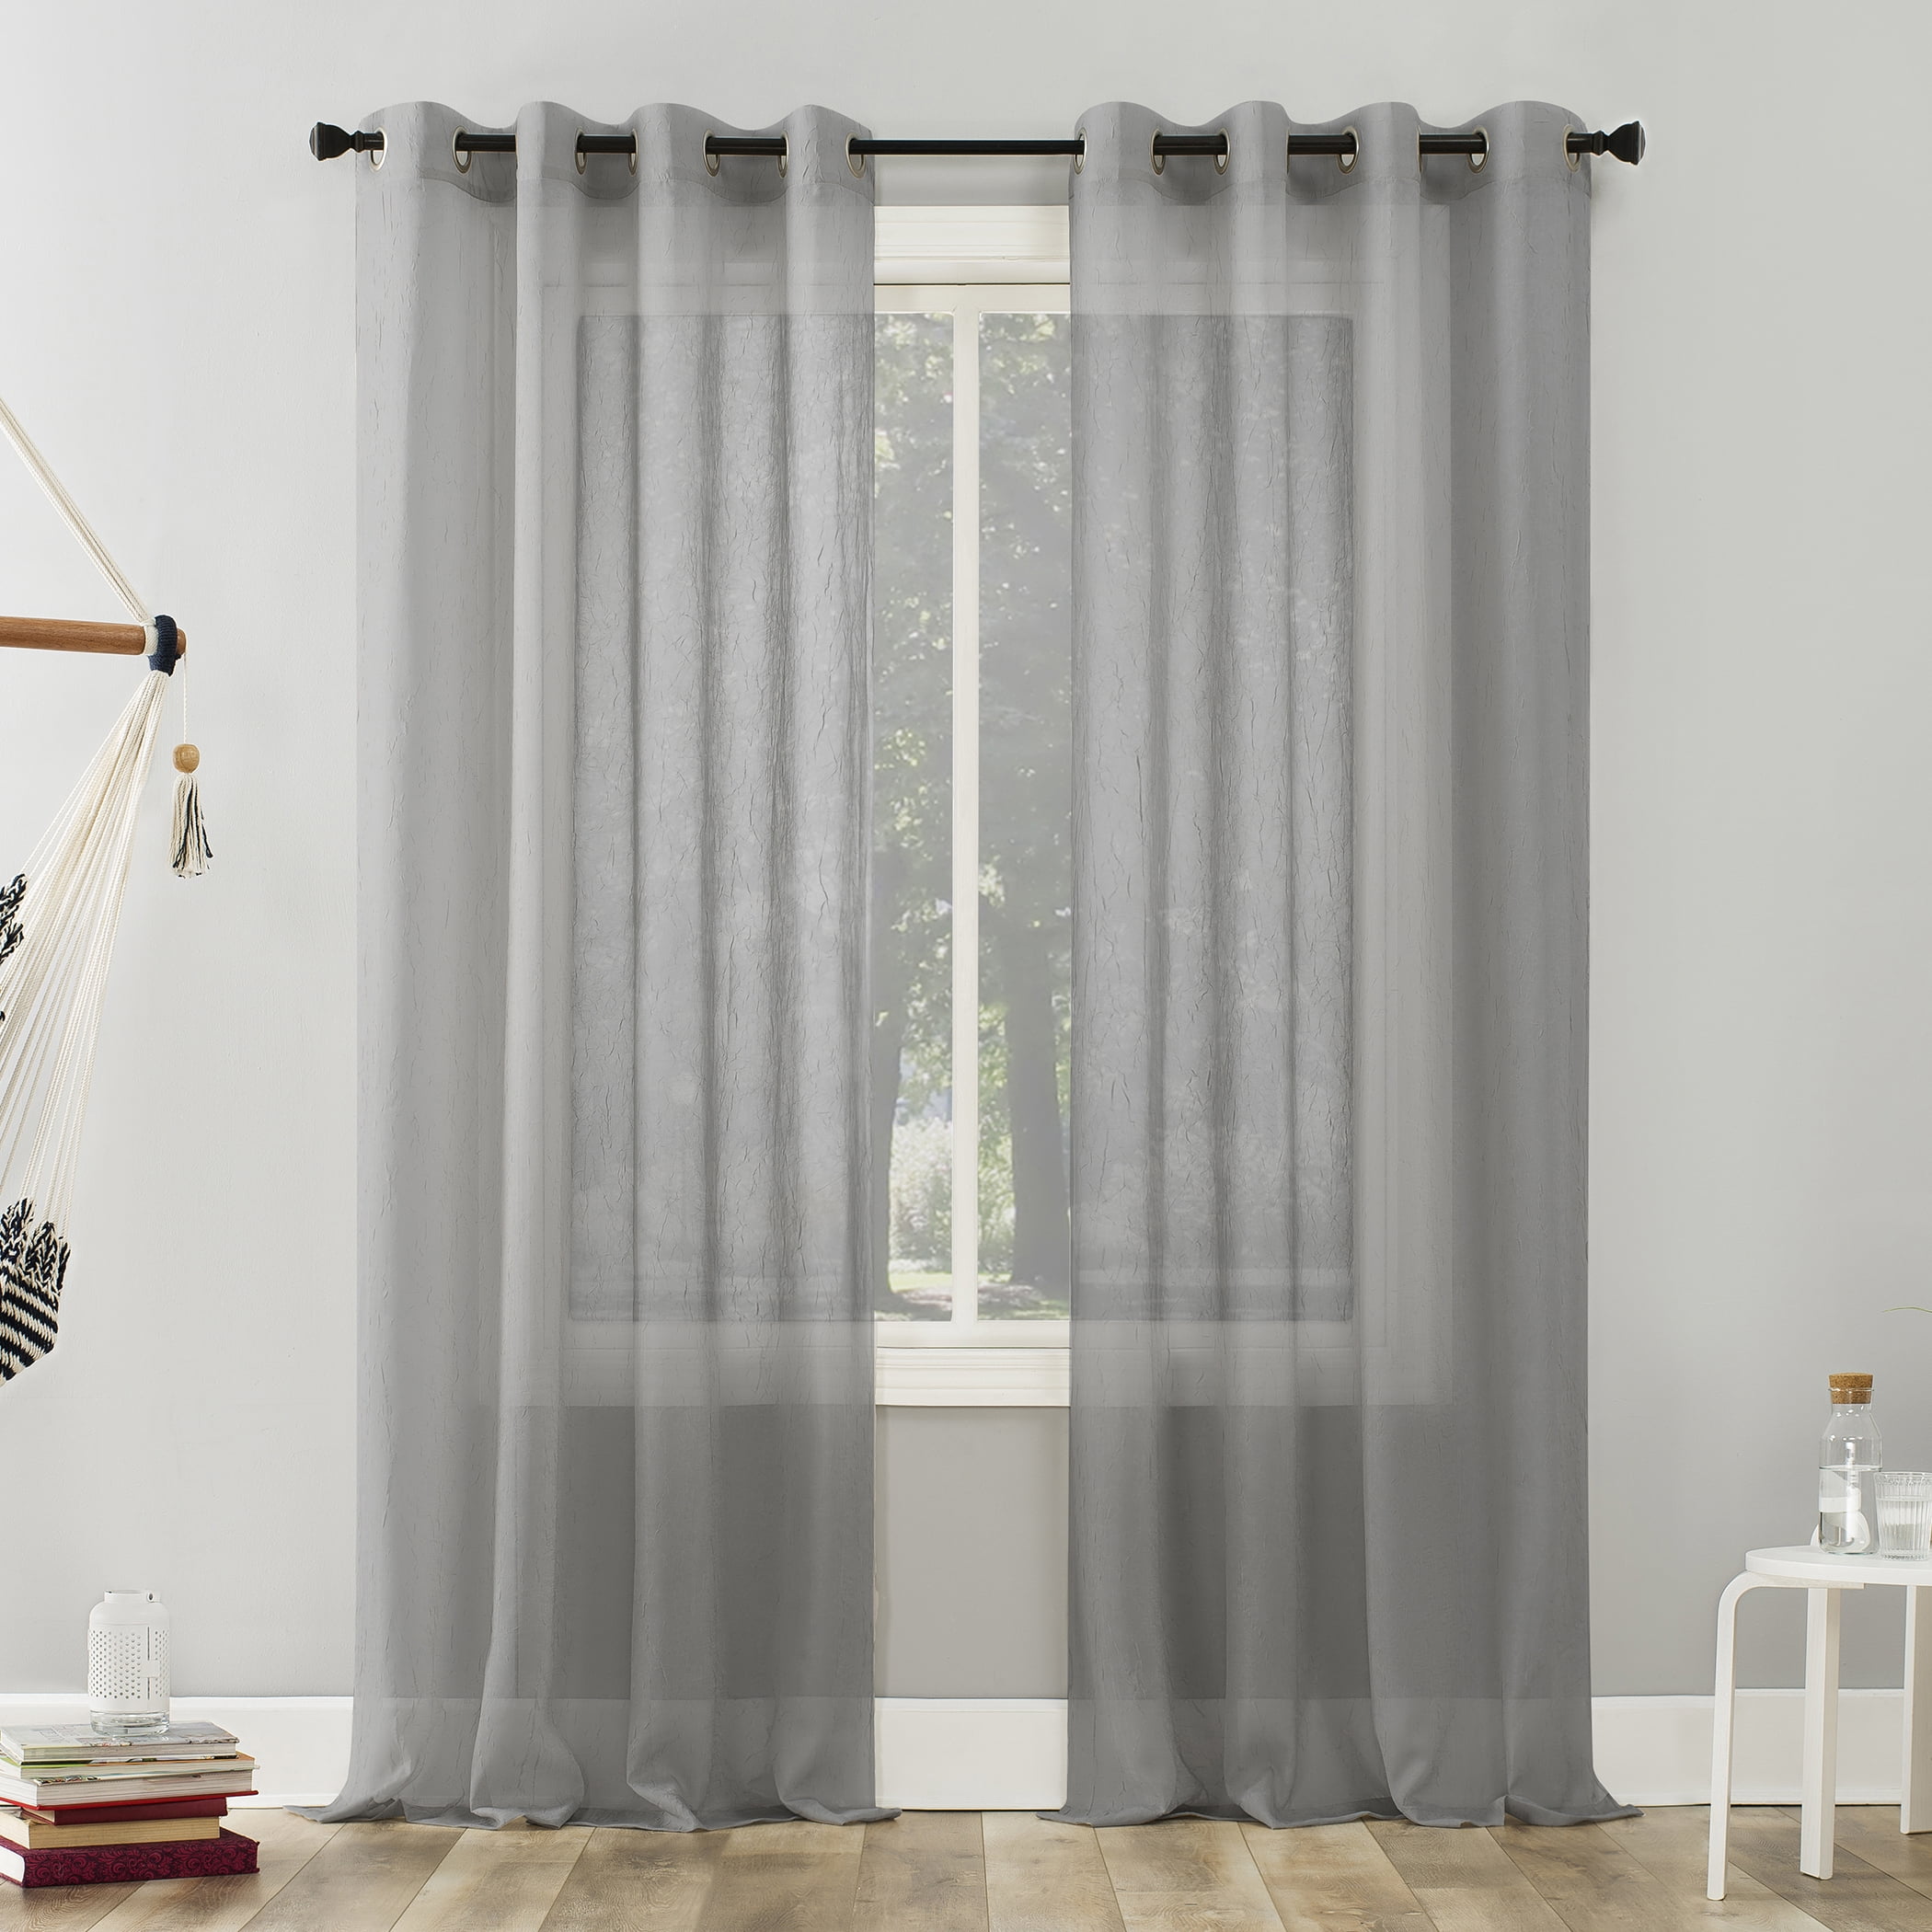 No 51 x 95 918 Erica Crushed Textured Sheer Voile Rod Pocket Curtain Panel Charcoal Gray 